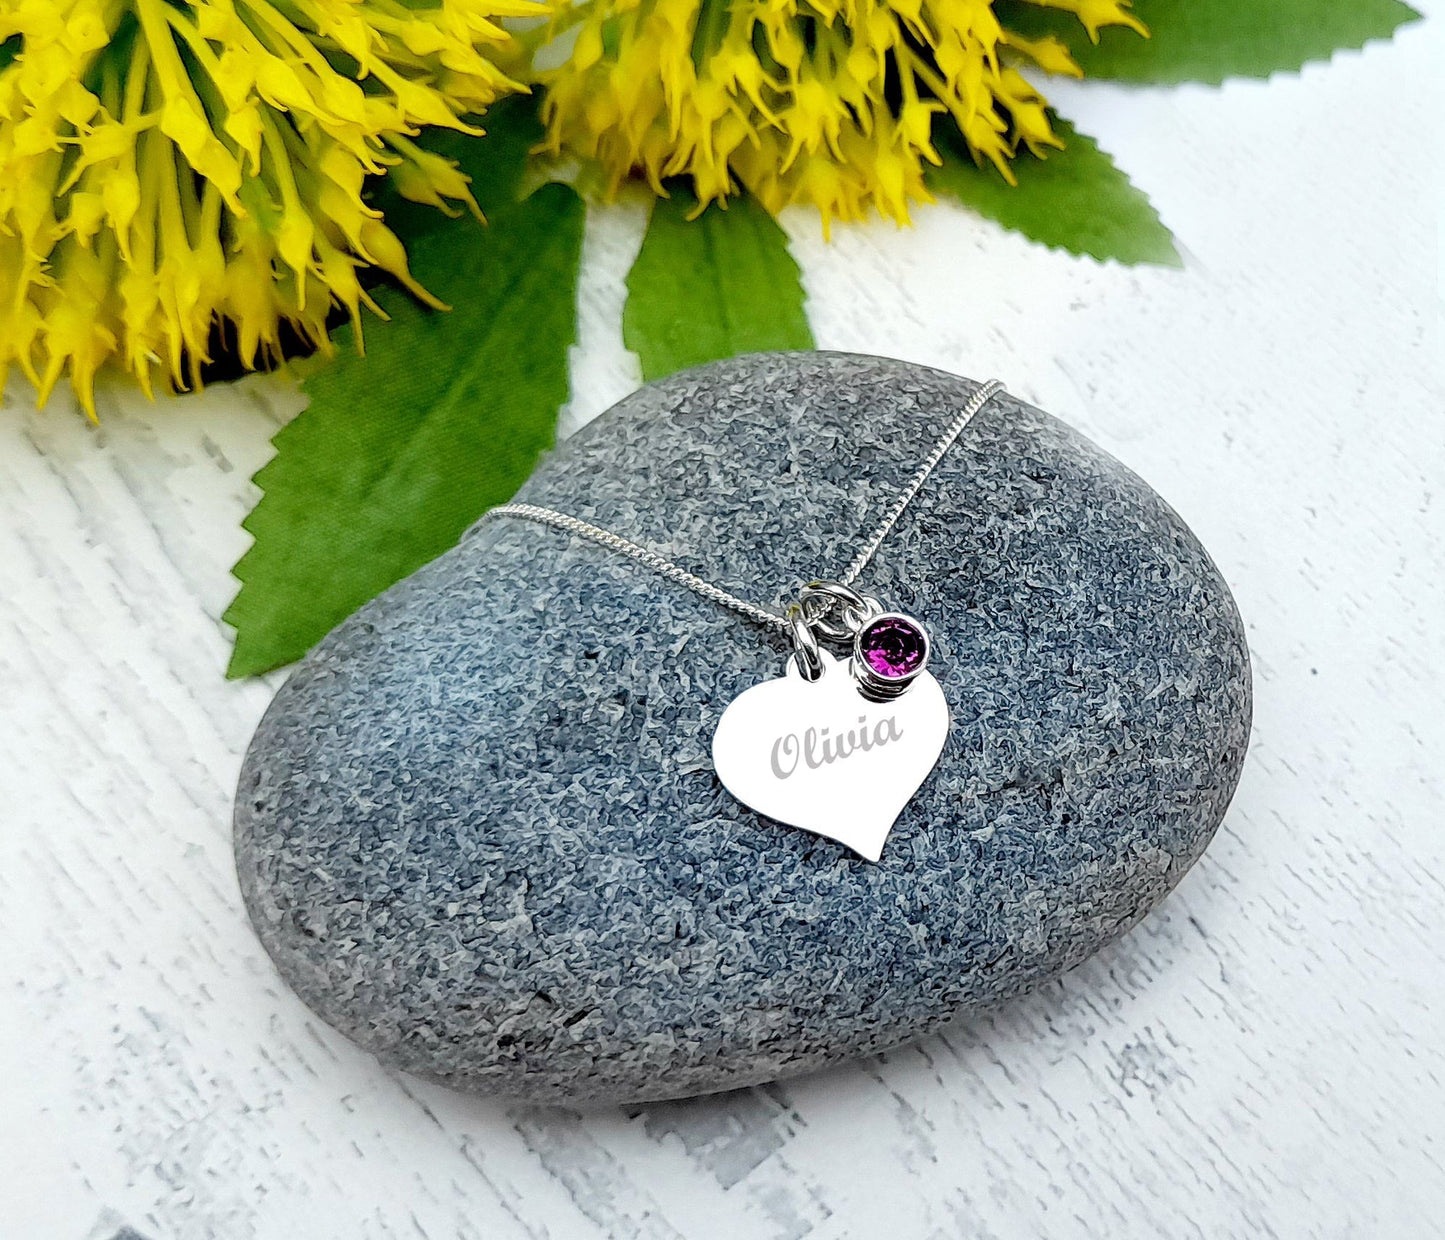 Sweet 16 Birthday Gift, Engraved Heart Birthstone Necklace 925 Sterling Silver, Personalised Necklace, Message Jewellery